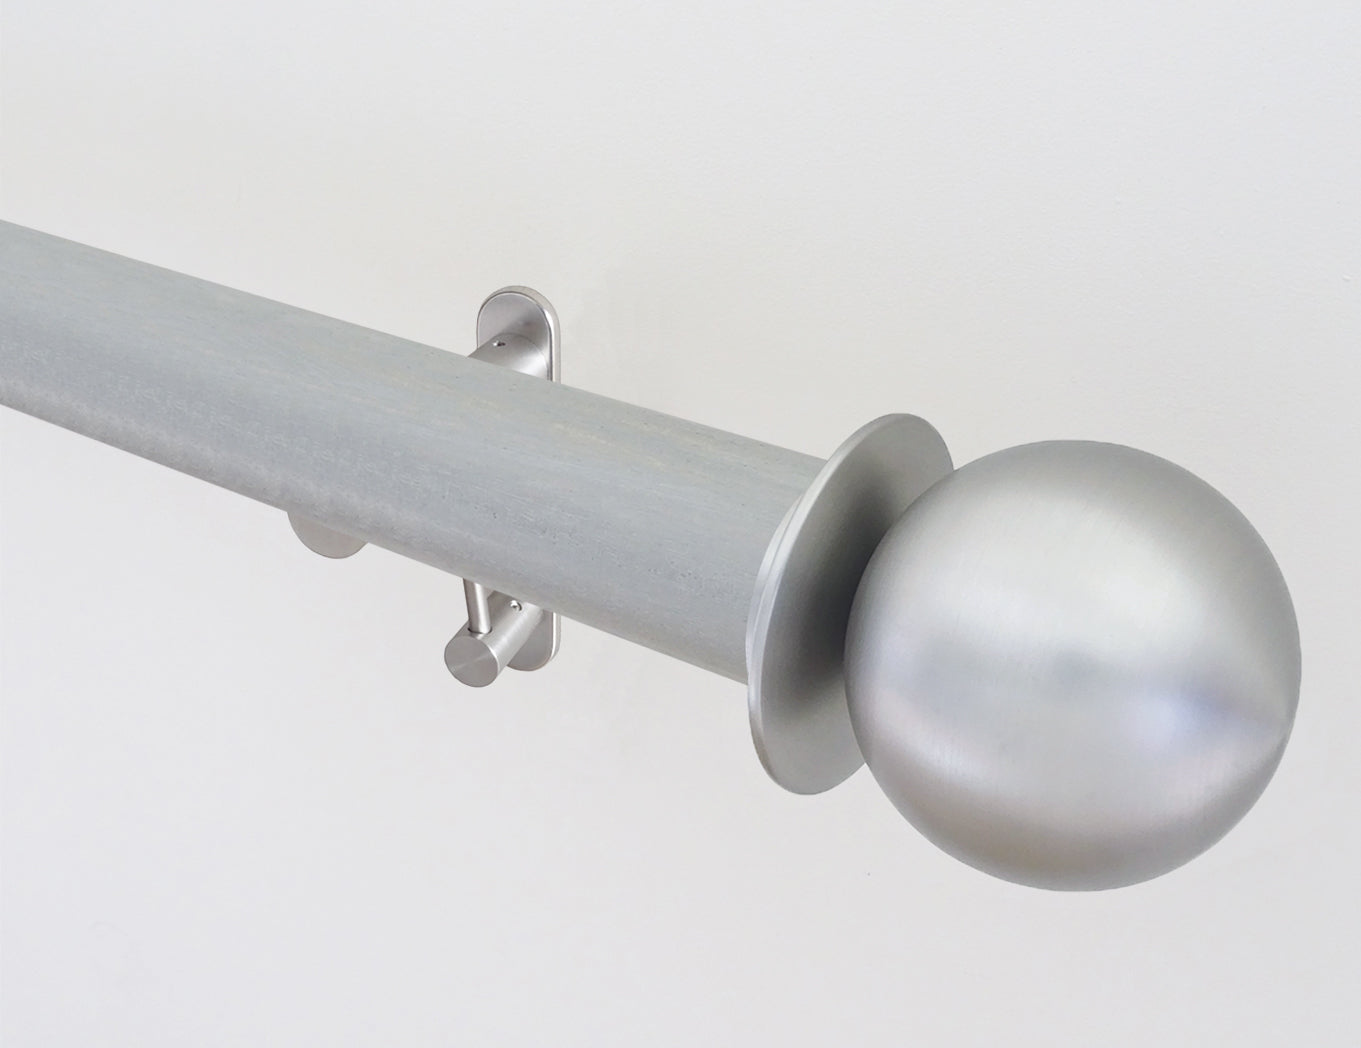 Blue grey tracked wooden pole in wood pigeon with ball finials